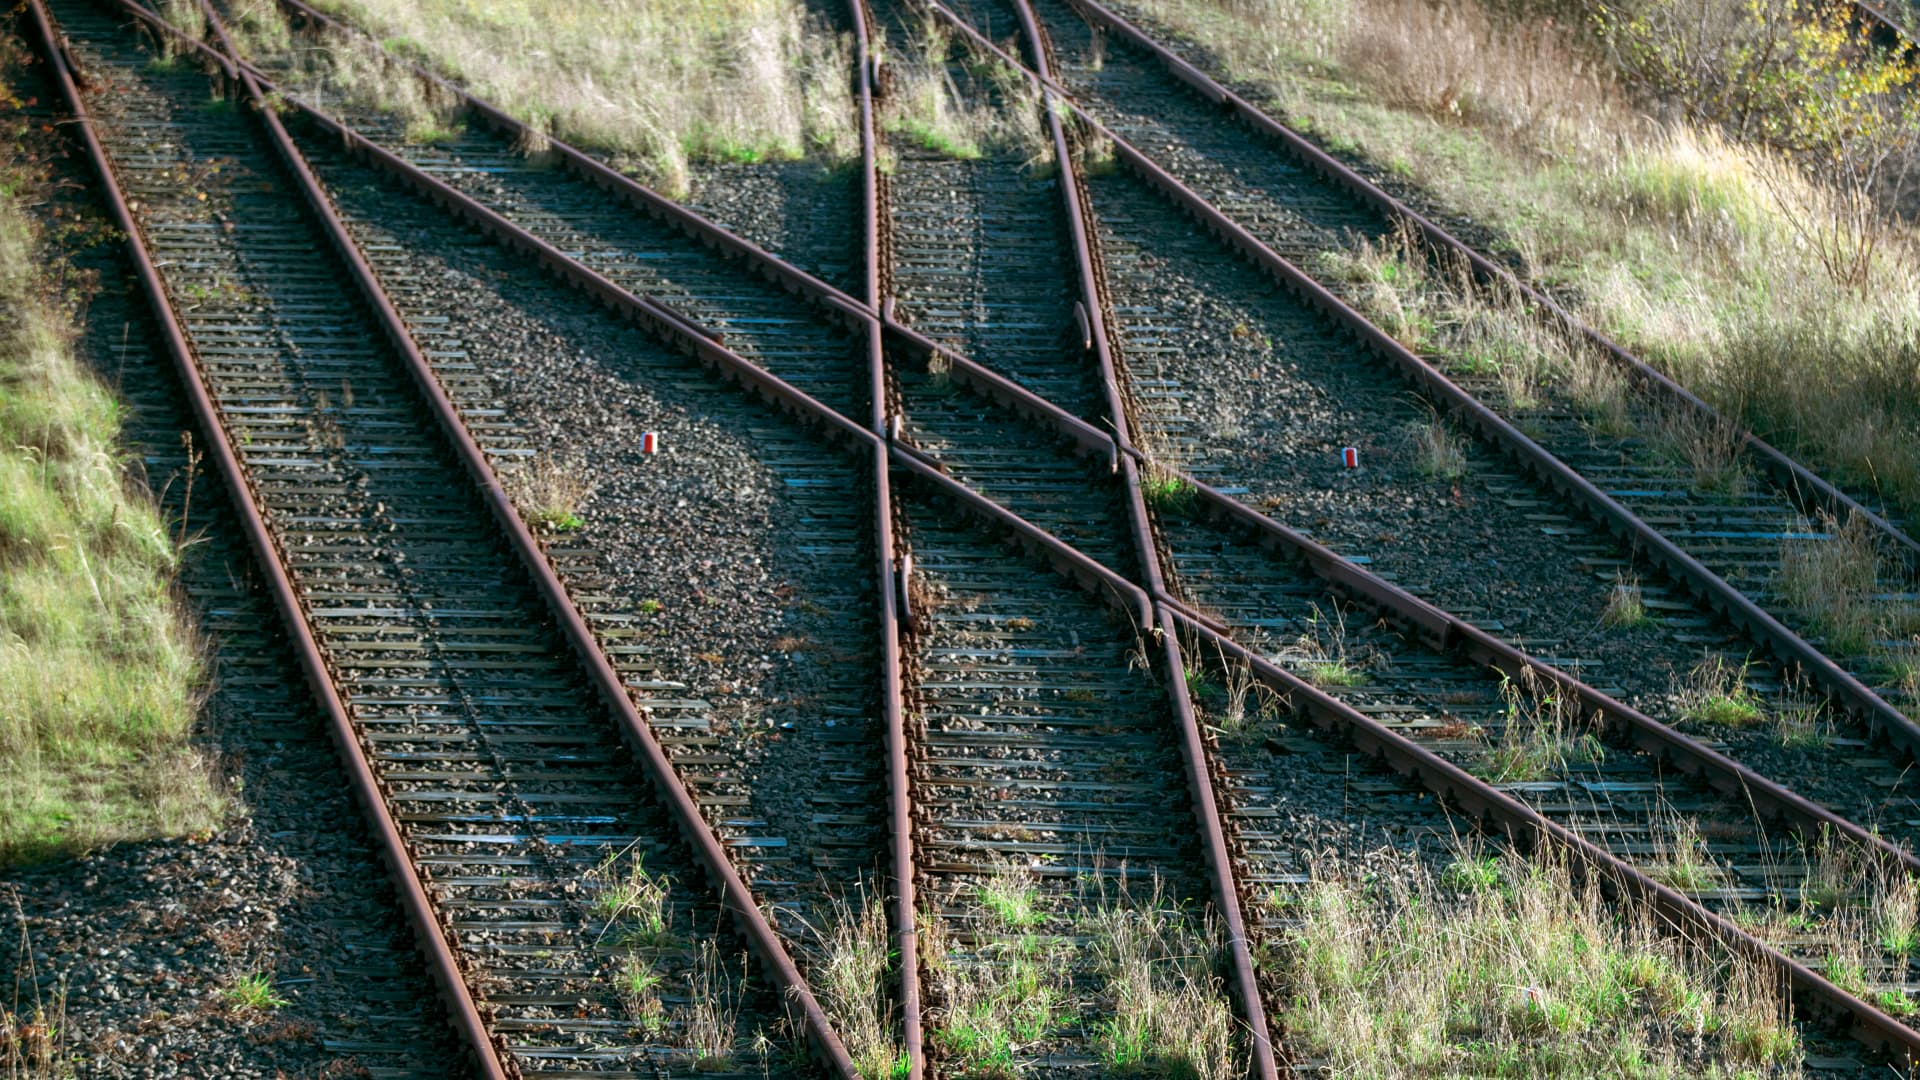 12 November 2019, Mecklenburg-Western Pomerania, Sassnitz: Grass and weeds grow on the tracks of the Russian broad gauge in the port of Mukran. The wide-gauge network built in the GDR era was used for loading and unloading railway ferries with Russian freight wagons. The port on Rügen is now to become part of the Chinese Silk Road Initiative. For the first time on the entire route between Germany and China, part of the journey will be by sea between the ports of Mukran and Baltysk in the Kaliningrad region. A ship with the first 41 containers of a test train, which had started at the beginning of November in Xi'an in central China, was unloaded in Mukran. Photo: Jens Büttner/dpa-Zentralbild/ZB (Photo by Jens Büttner/picture alliance via Getty Images)